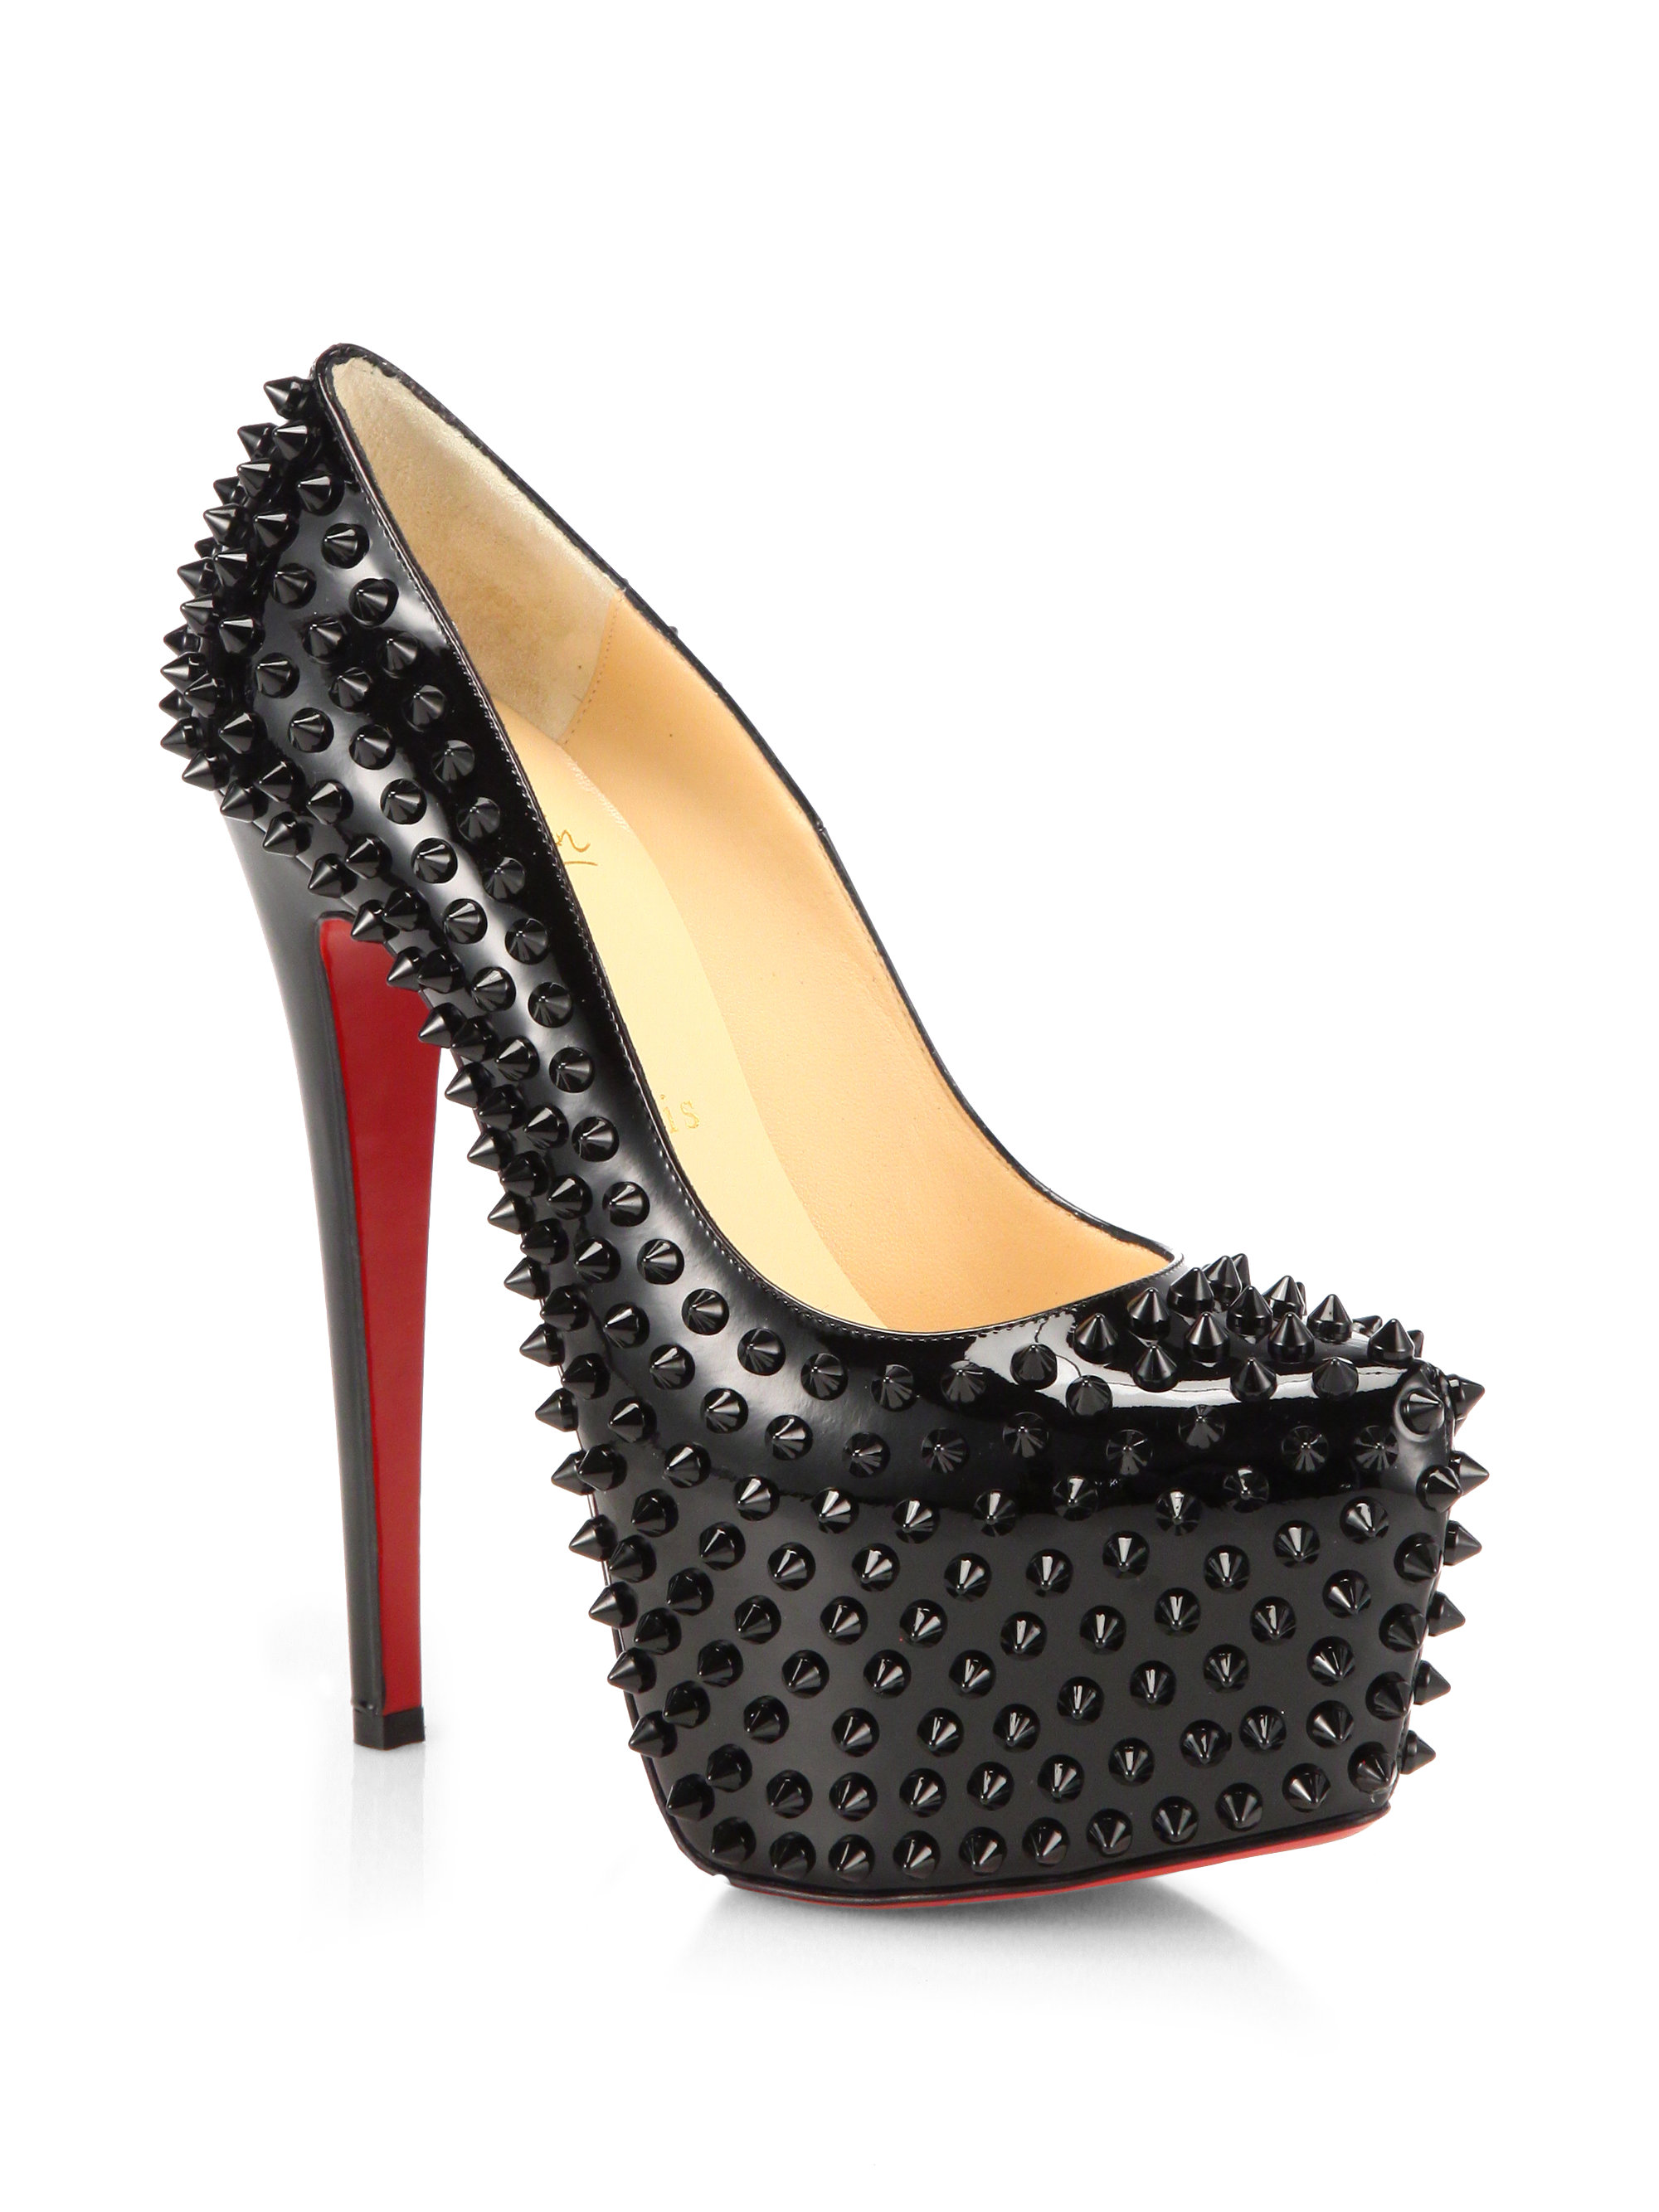 christian louboutin Spike pumps Black leather | The Little Arts ...  